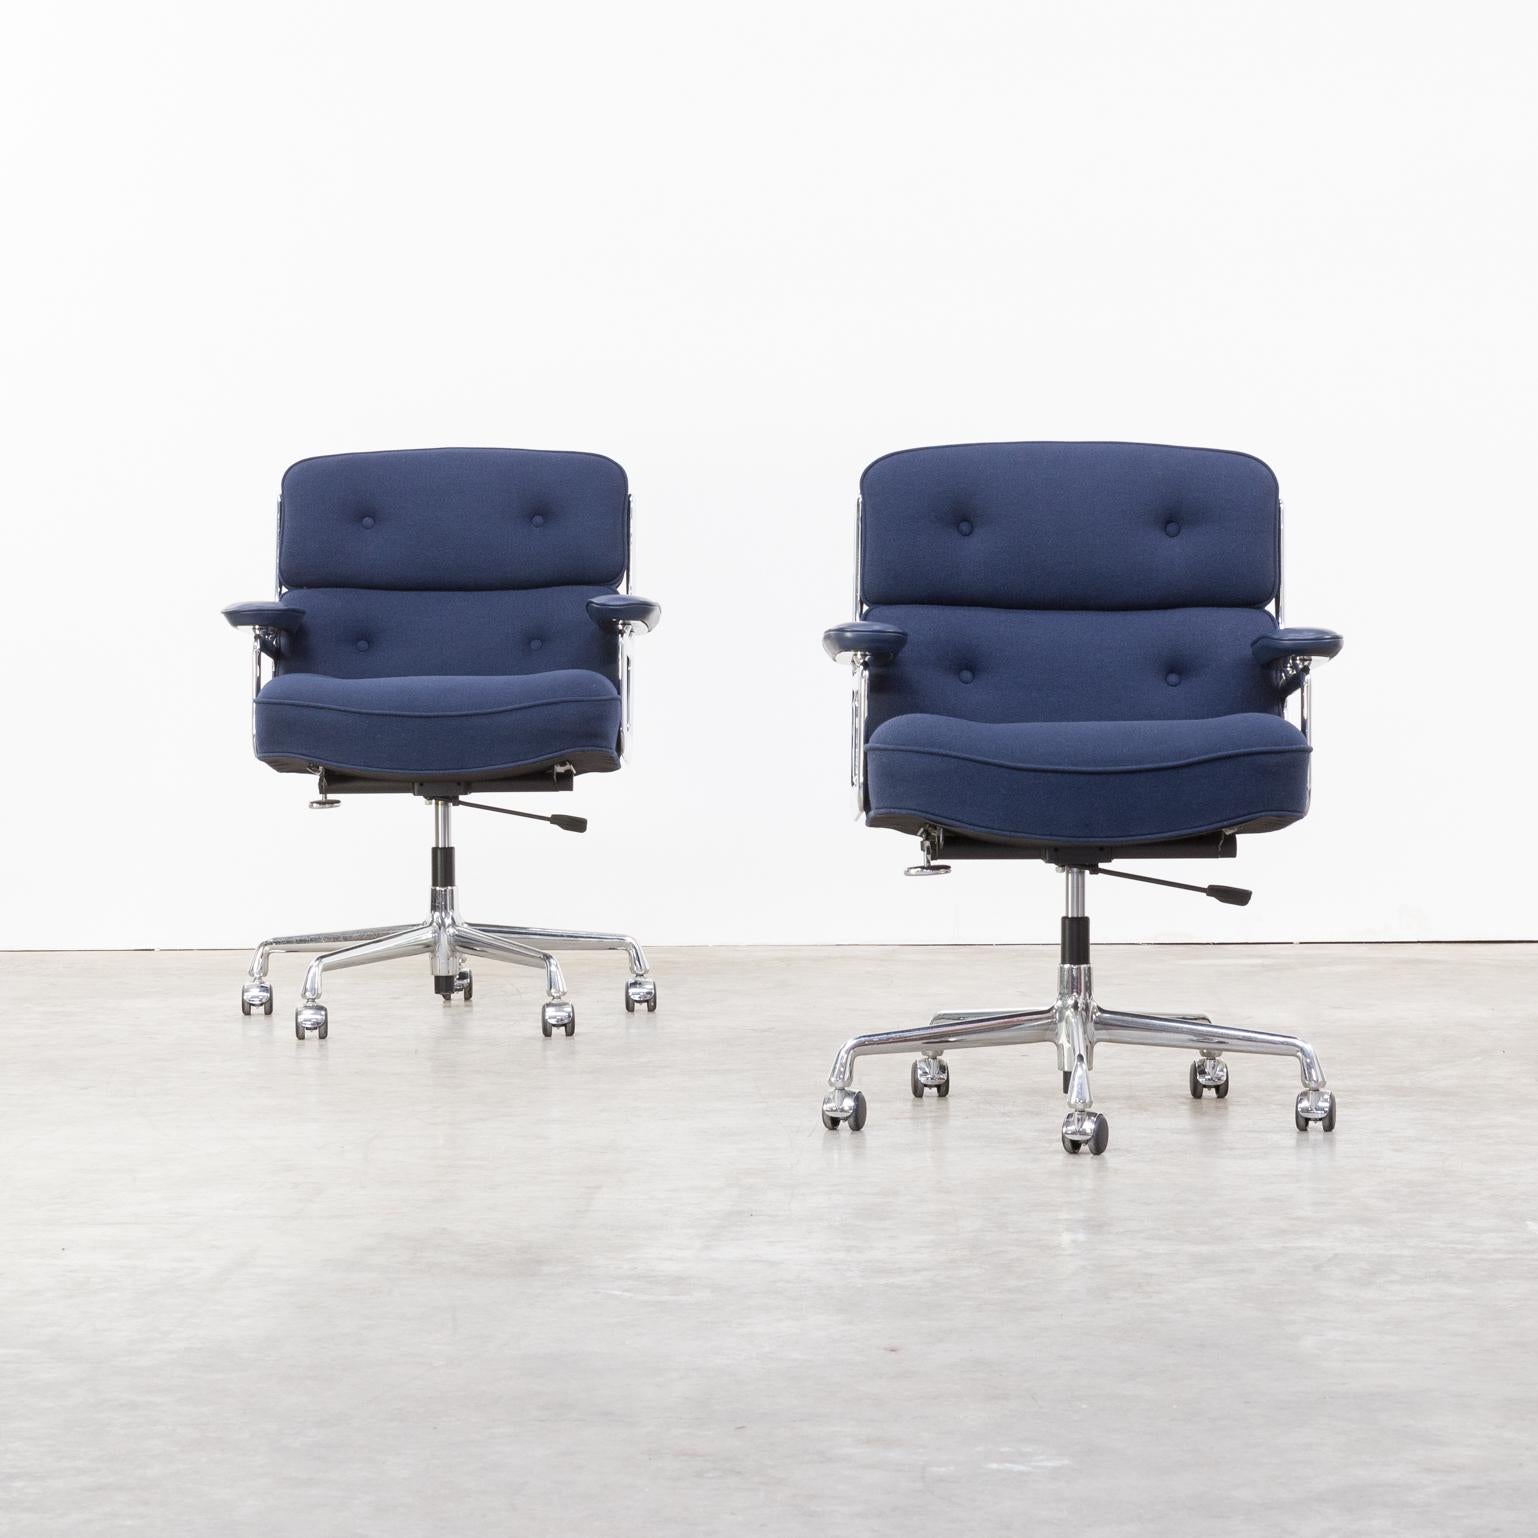 1960s Charles & Ray Eames ‘Lobby Chair’ ES 104 for Vitra, set of 2. Designed originally for the lobby of the Time Life building in New York (1959) this 3 cushions luxury office chair is named the king under office chairs. Set of two pieces in blue